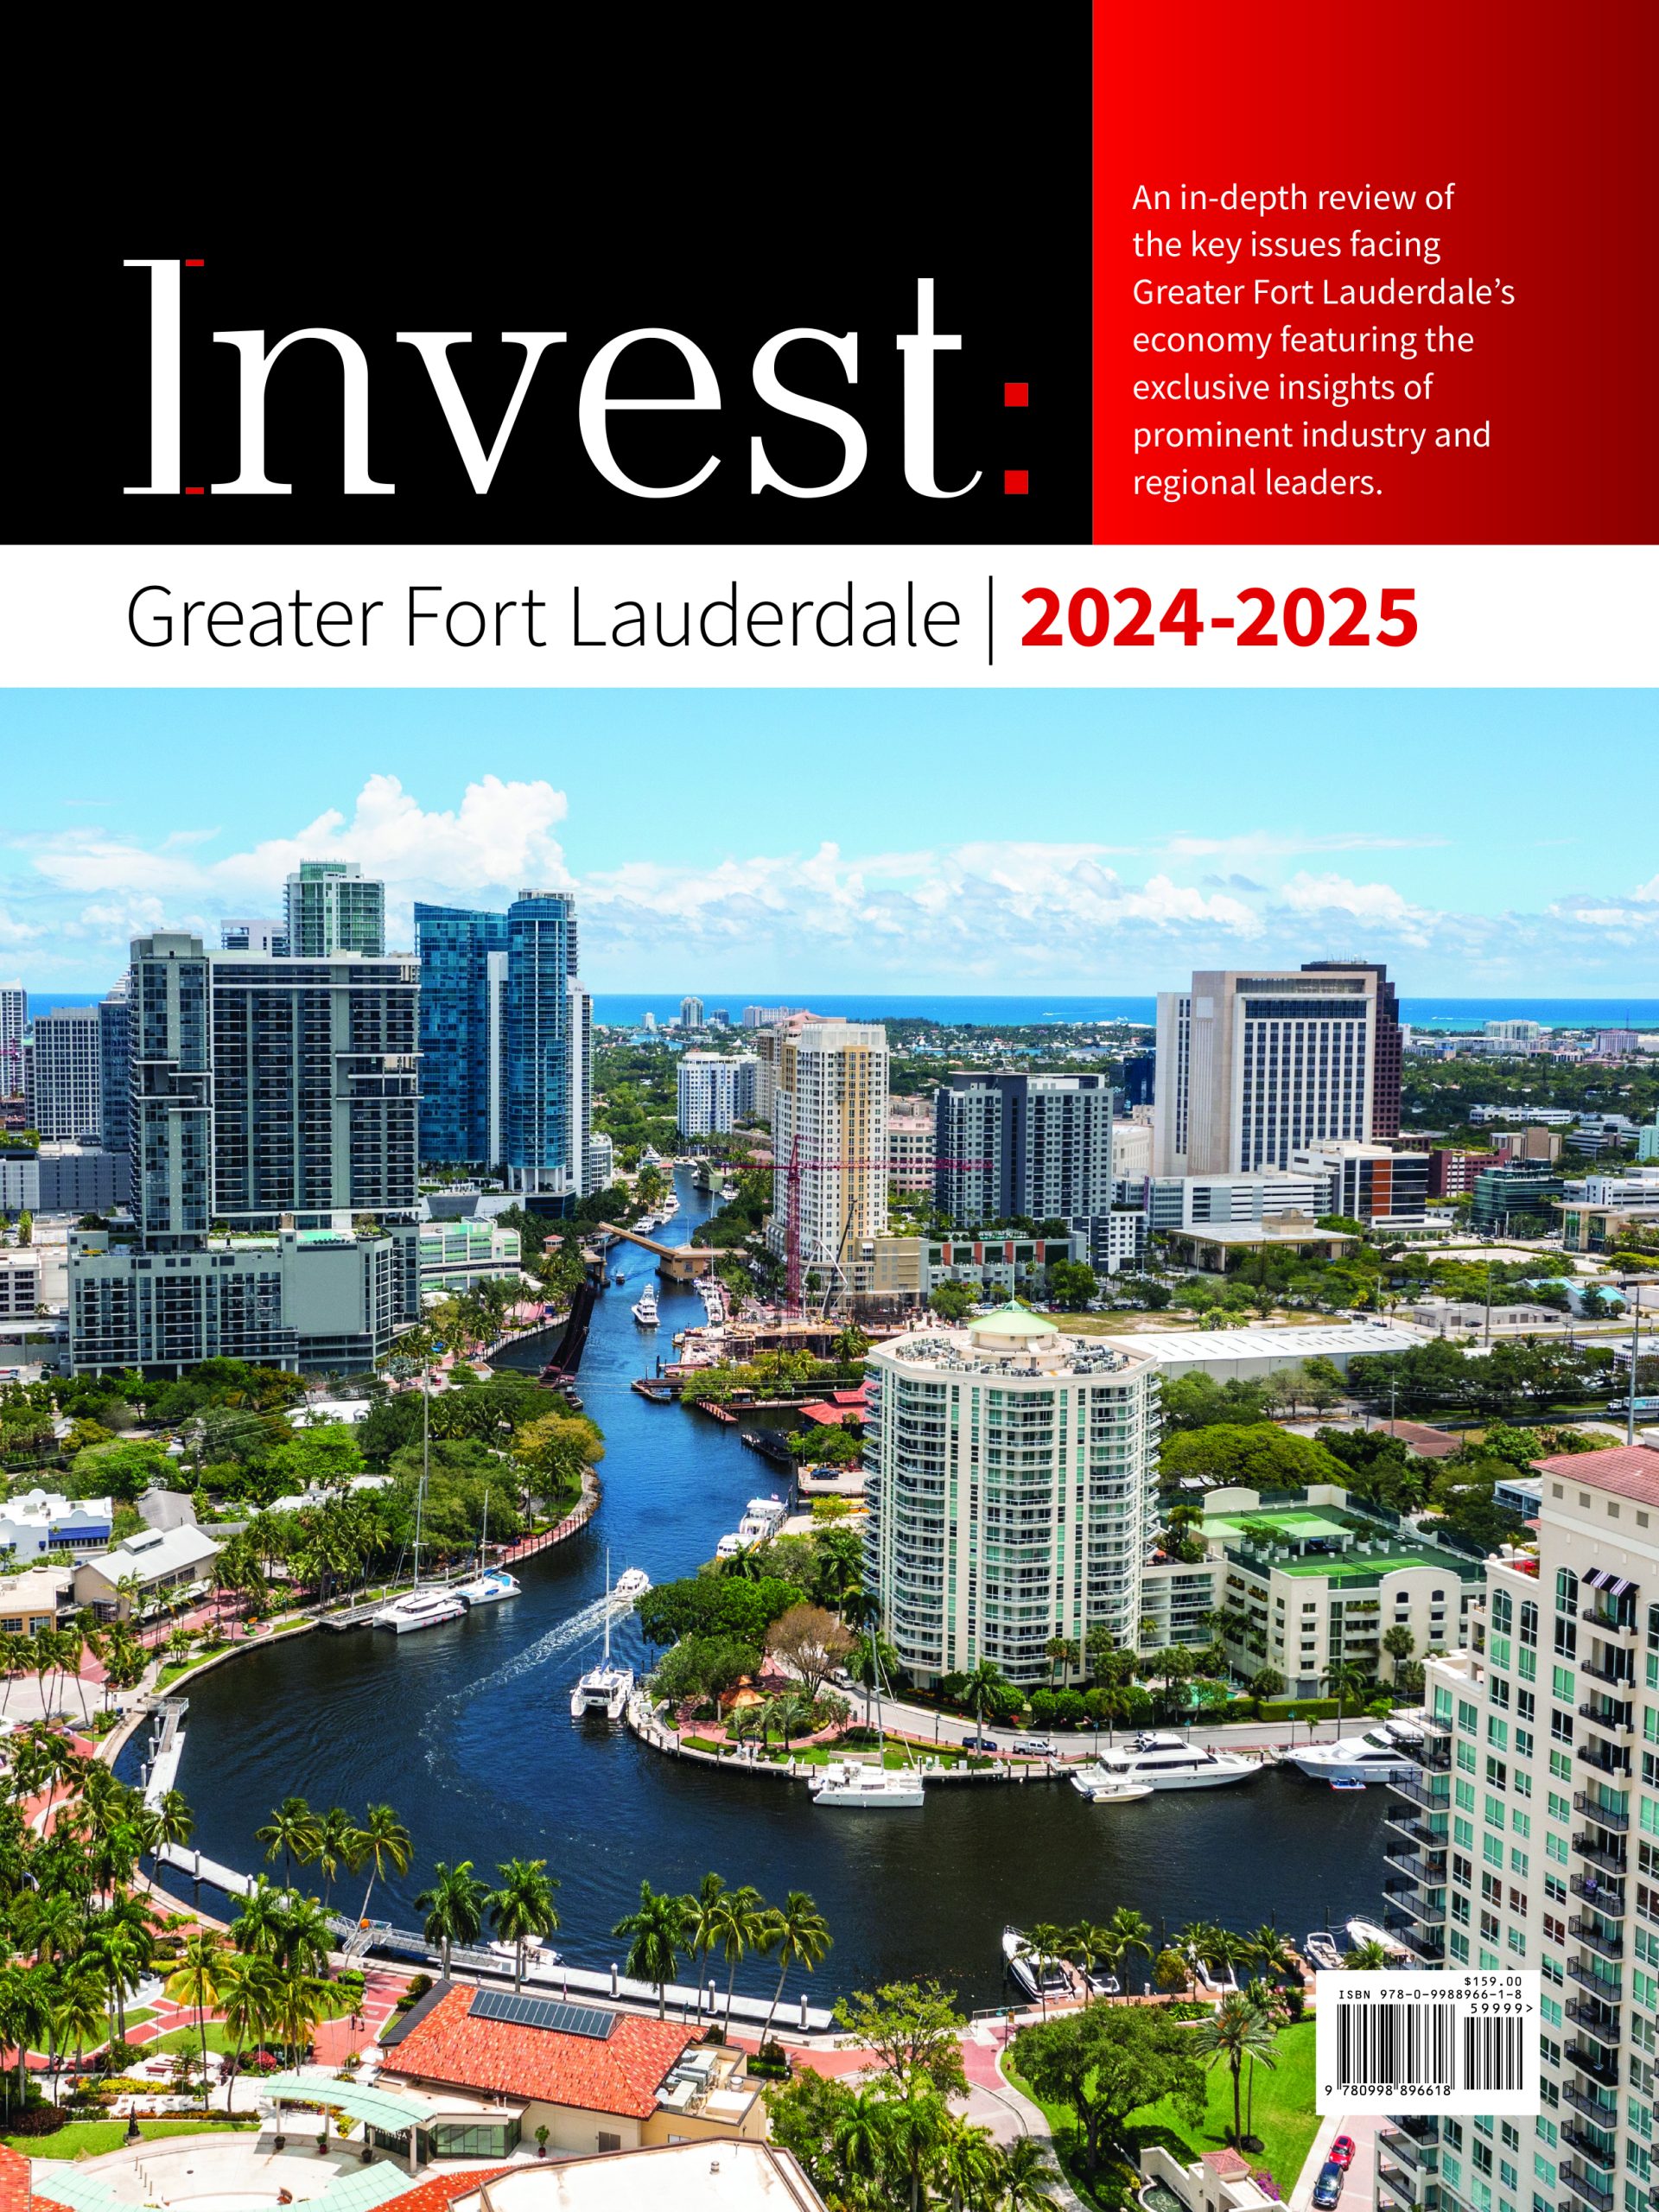 Greater Fort Lauderdale